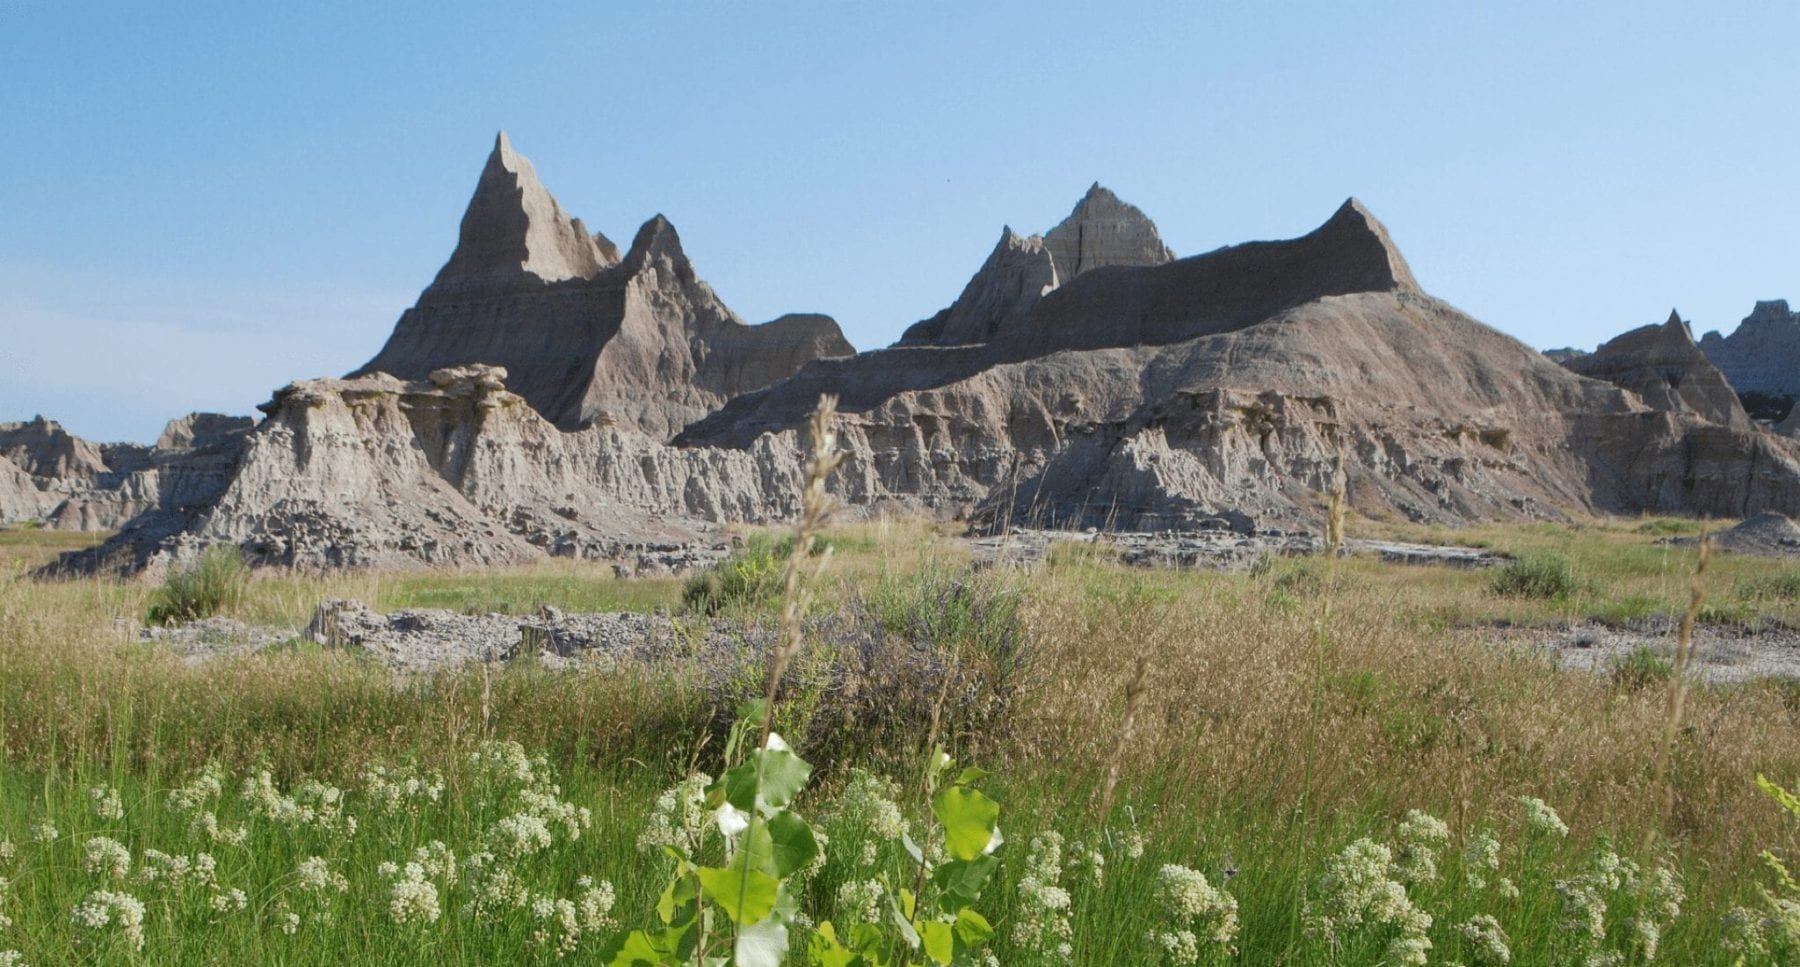 Castle Trail at the Badlands